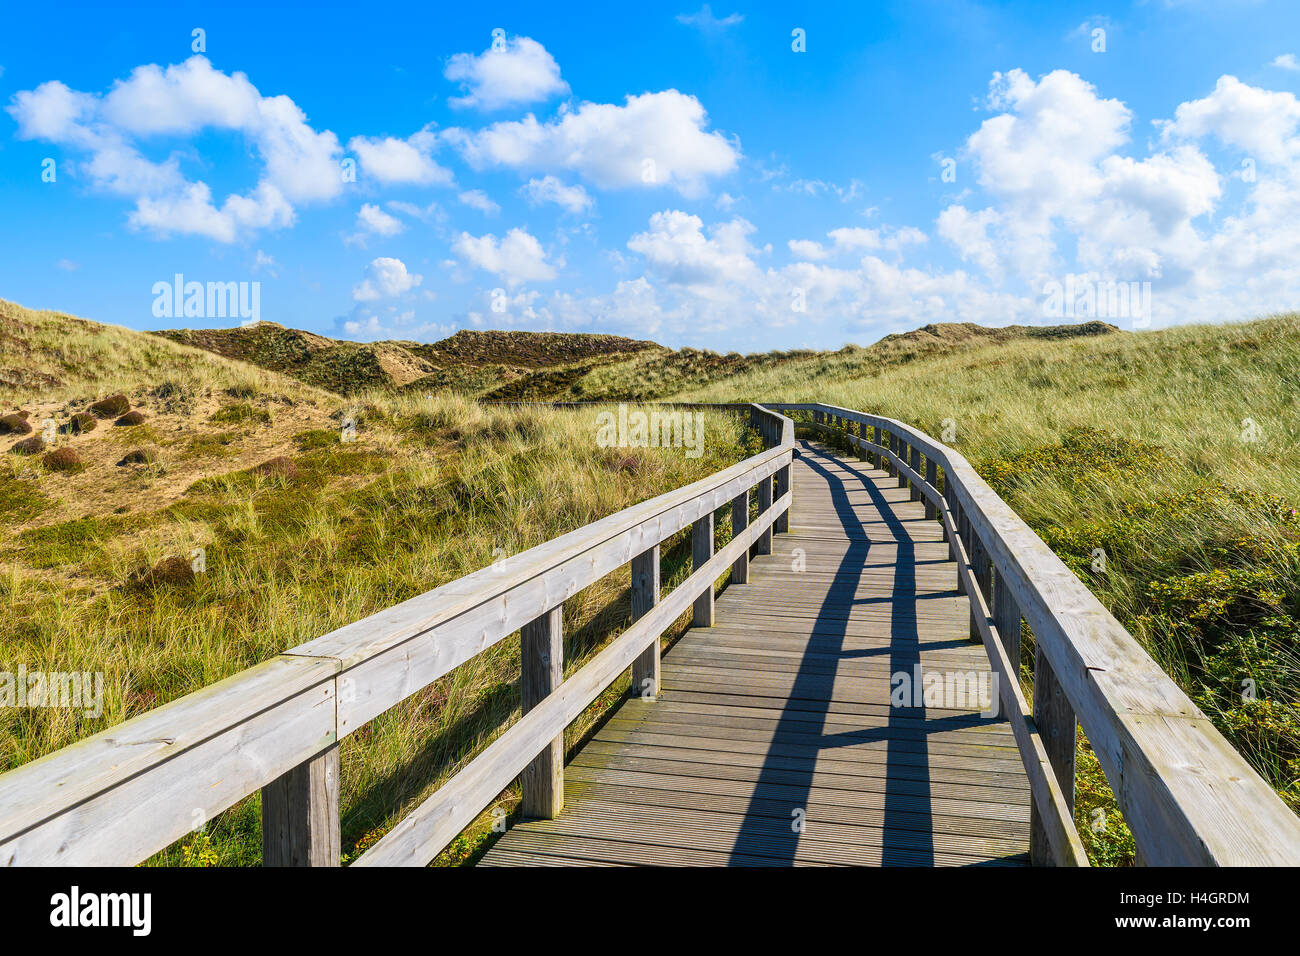 Wooden walkway to beach among sand dunes and sunny blue sky with white clouds, Sylt island, Germany Stock Photo